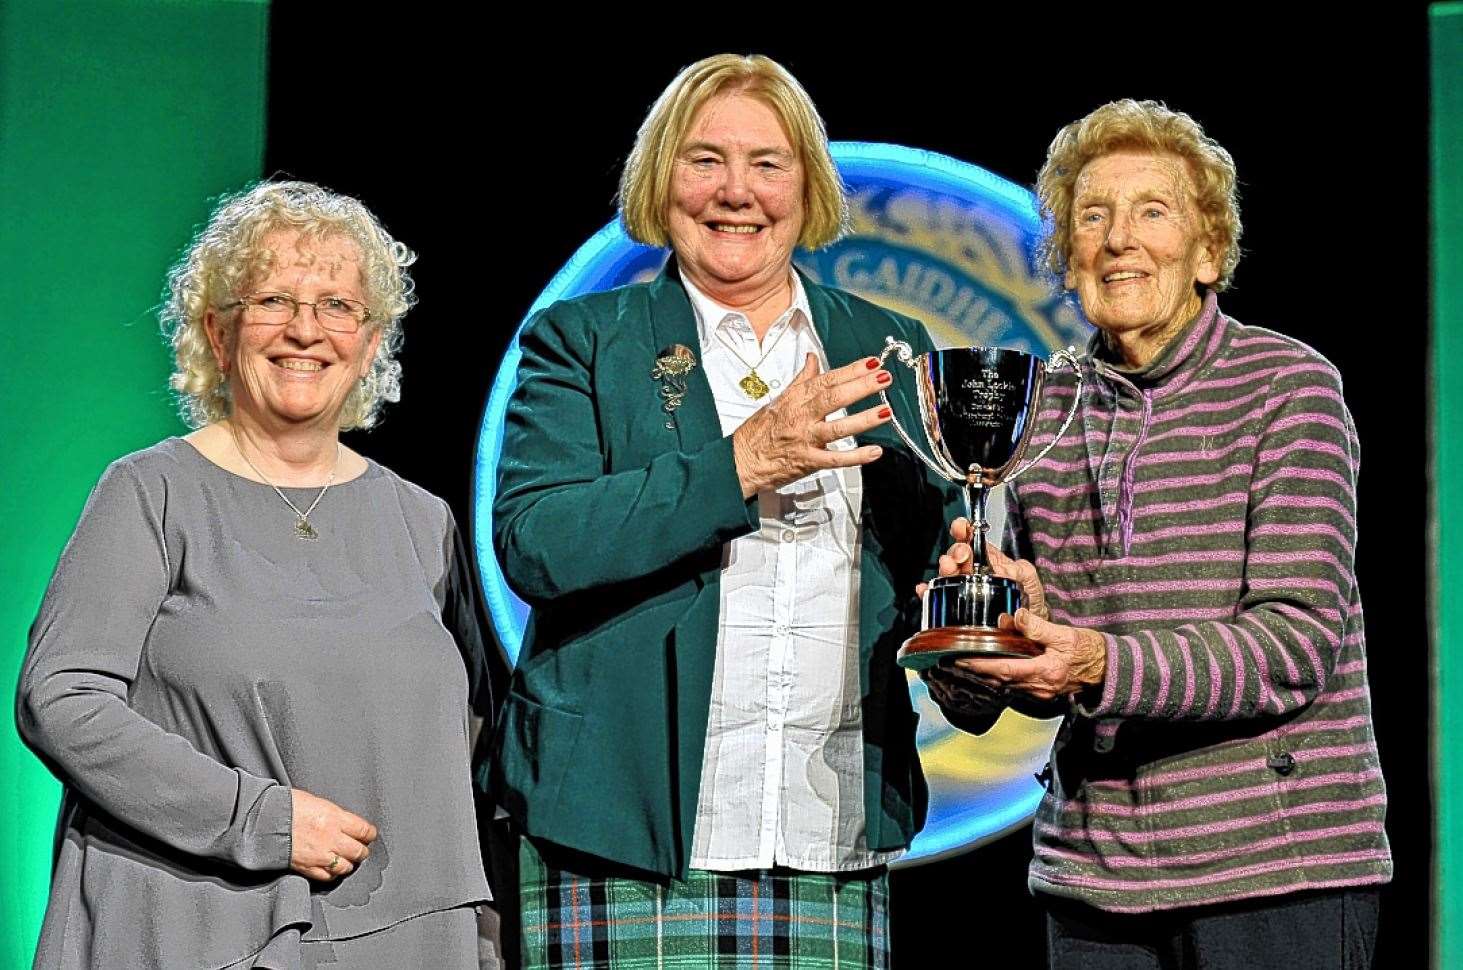 In 2015 the Edinburgh Caithness Association donated a trophy at the Royal National Mod in Oban in memory of past president John Lockie. The John Lockie Trophy would be awarded annually in the rural choirs category for the highest Gaelic mark across three choral competitions, and was won that year by Mull Gaelic Choir. His widow, Mary, presented the trophy to Elizabeth Jack, conductor of the Mull choir, and Janet Macdonald, Gaelic tutor. Picture: Graham Hood Photography